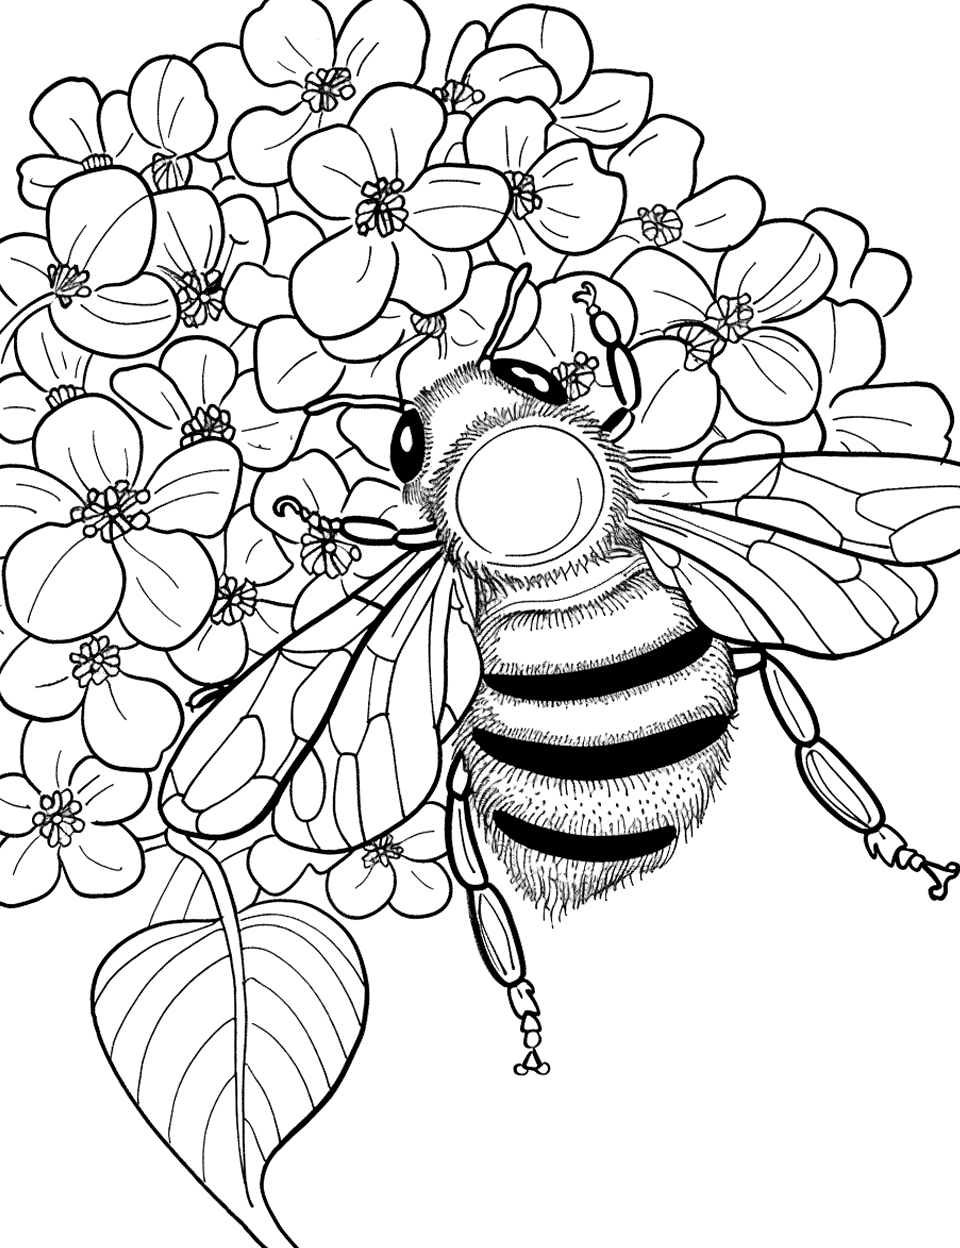 Bee on a Hydrangea Cluster Coloring Page - A bee moving among the small flowers of a hydrangea cluster.